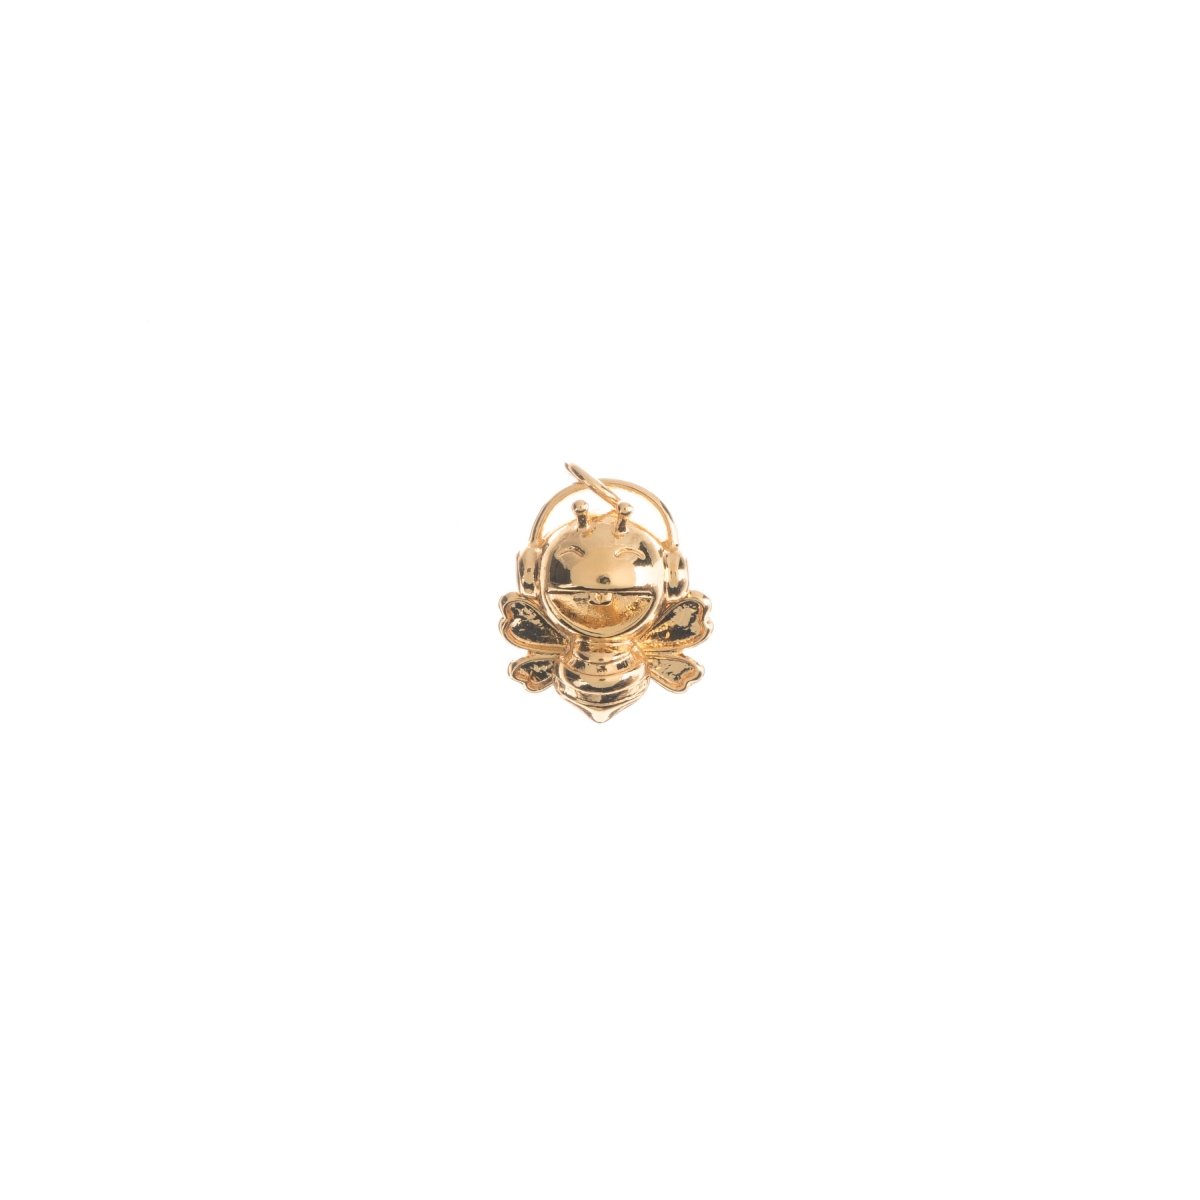 Teeny Tiny 18k Gold filled Bee Charm, Dainty Queen Bee Charm, Dainty Delicate Bee Pendant Jewelry, CL-C-222 - DLUXCA